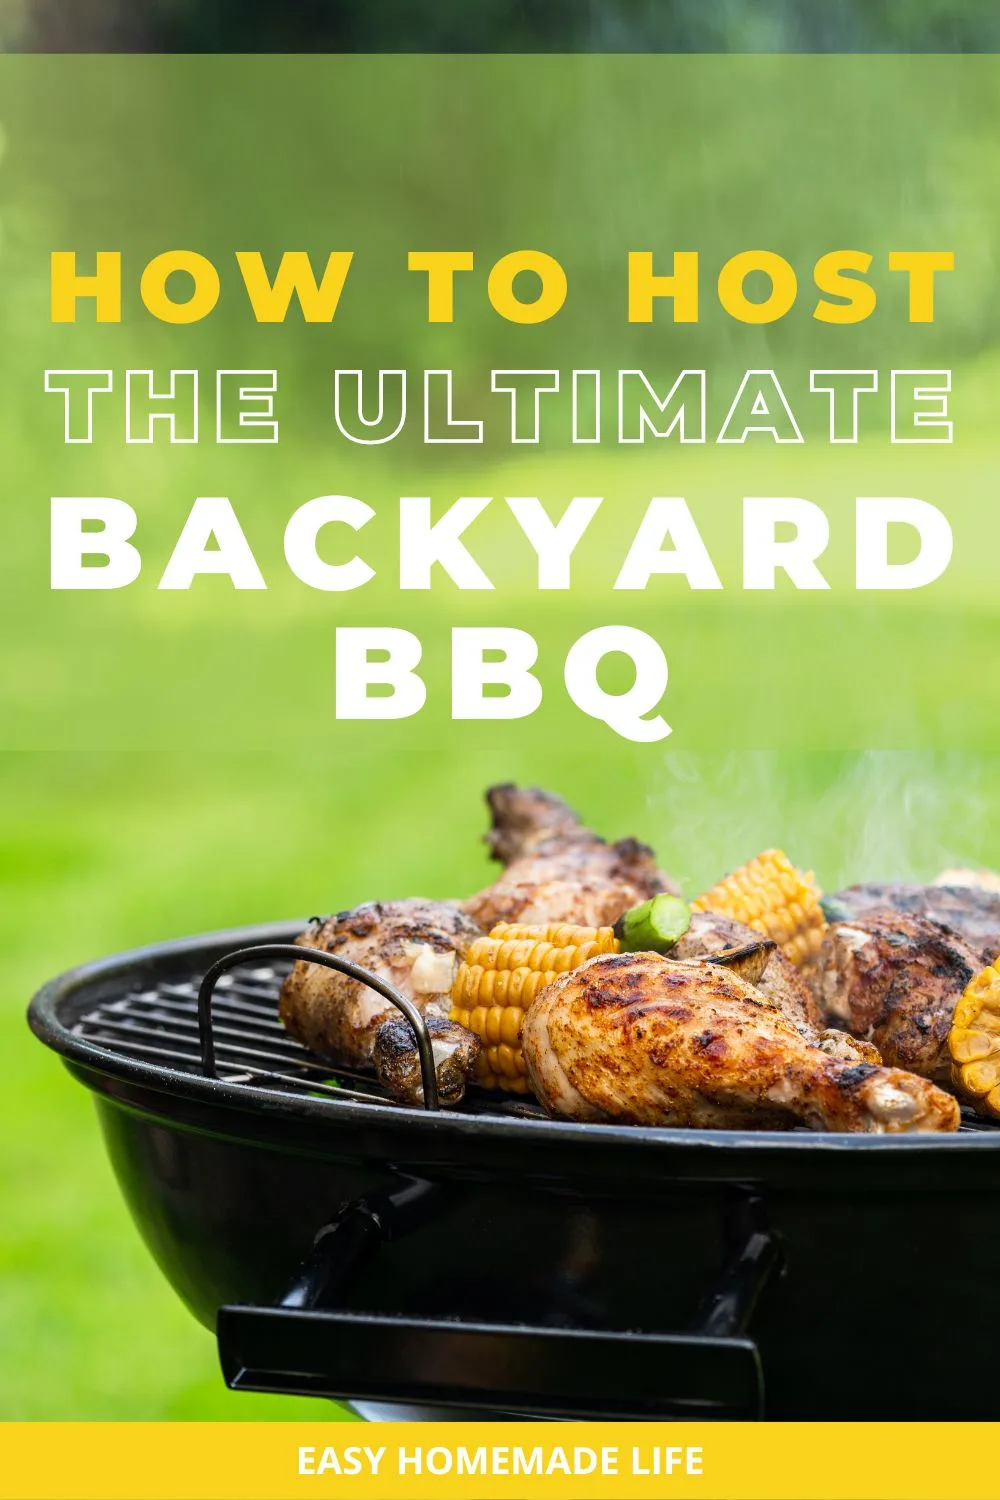 How to host the ultimate backyard bbq.